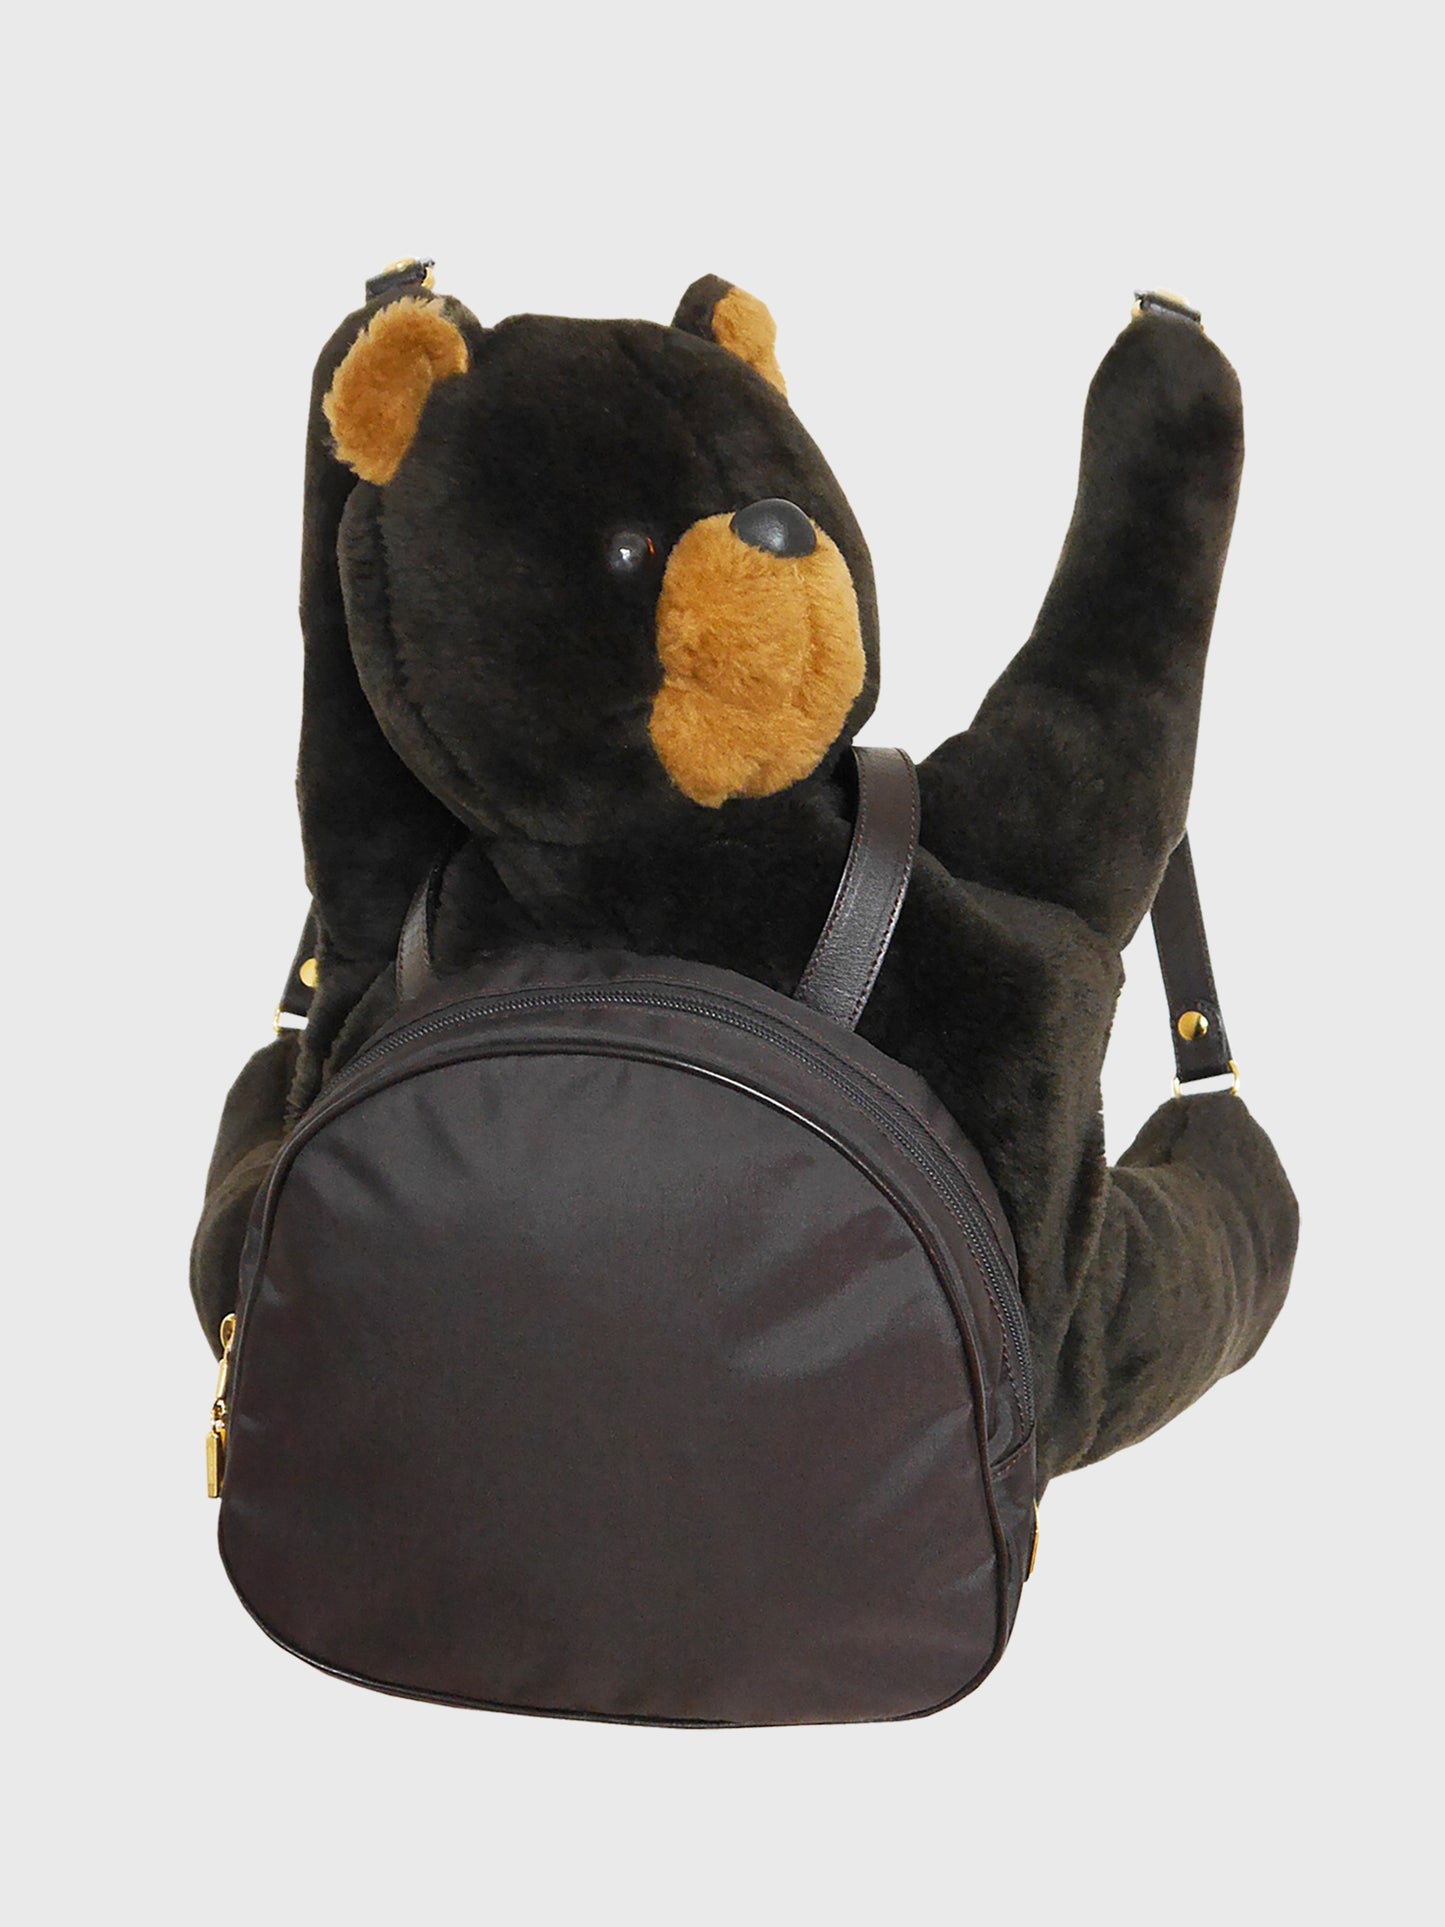 MOSCHINO by Redwall Vintage Collectible Teddy Bear Backpack